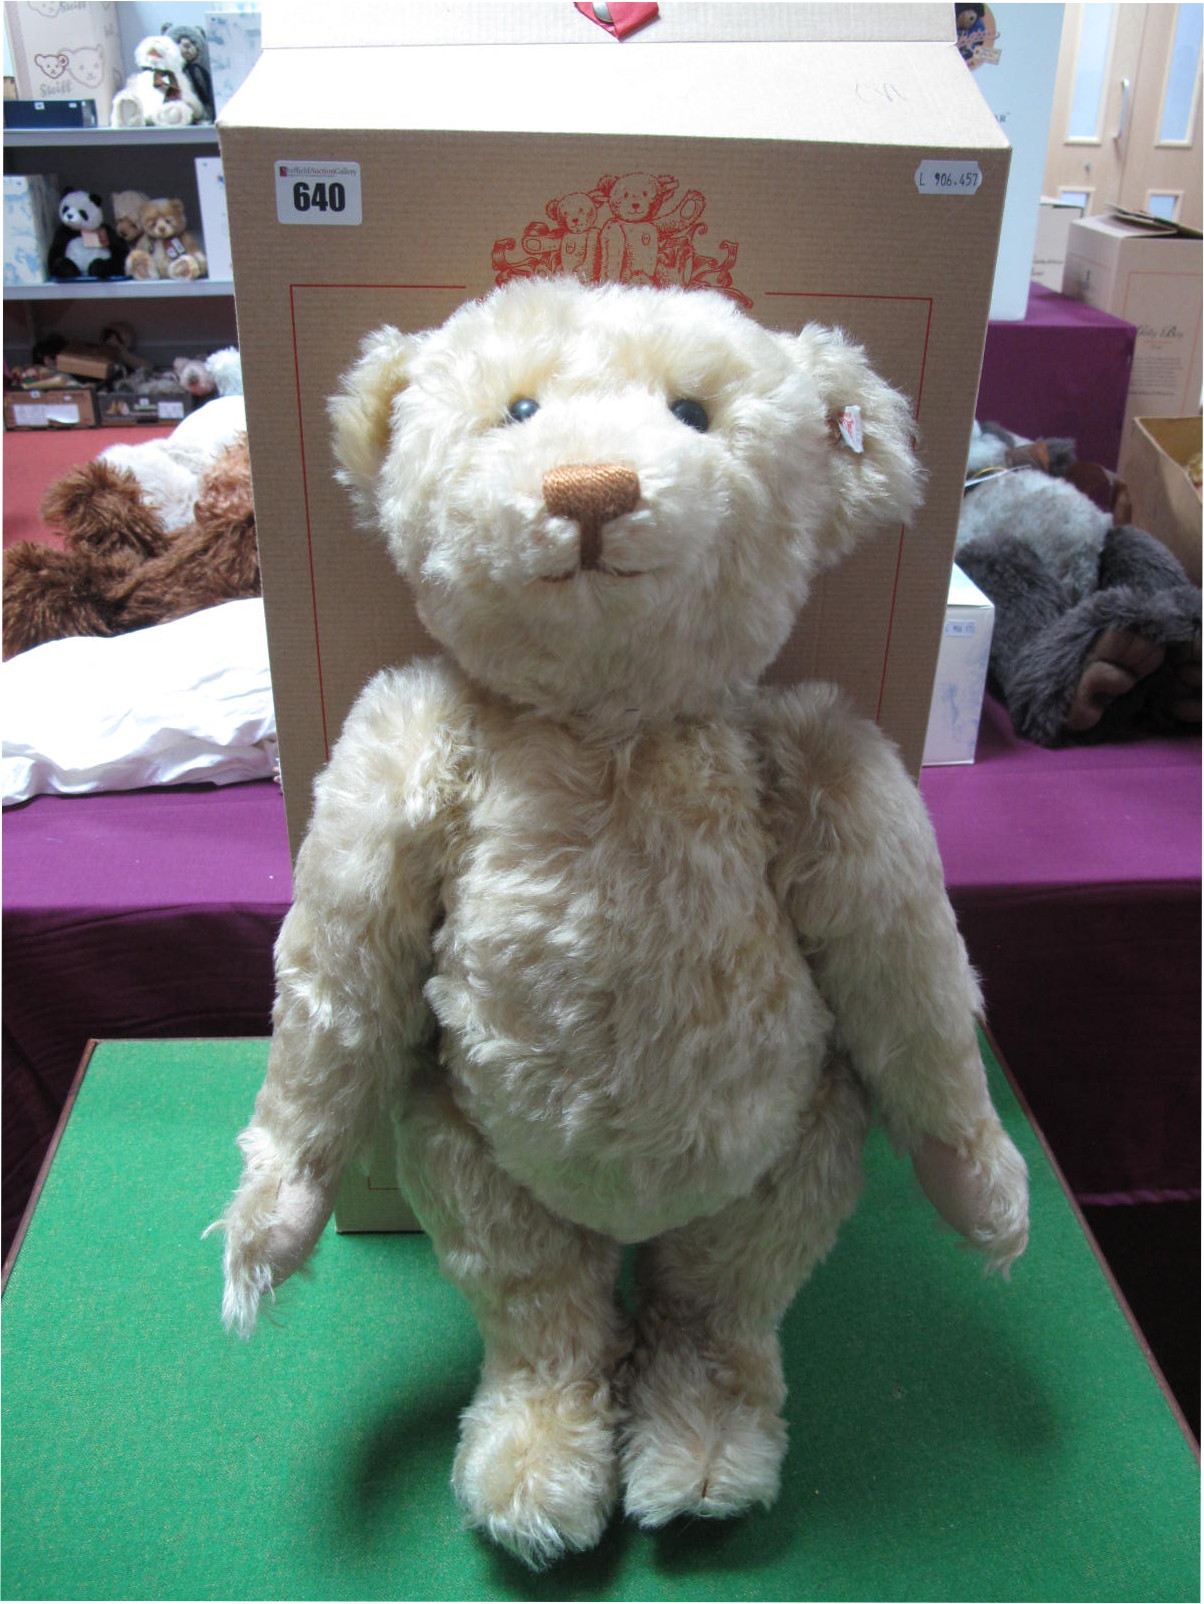 A Modern Steiff Jointed Teddy Bear #038297, Teddy Old Gold, 52cm high, certified No. 01518. Boxed